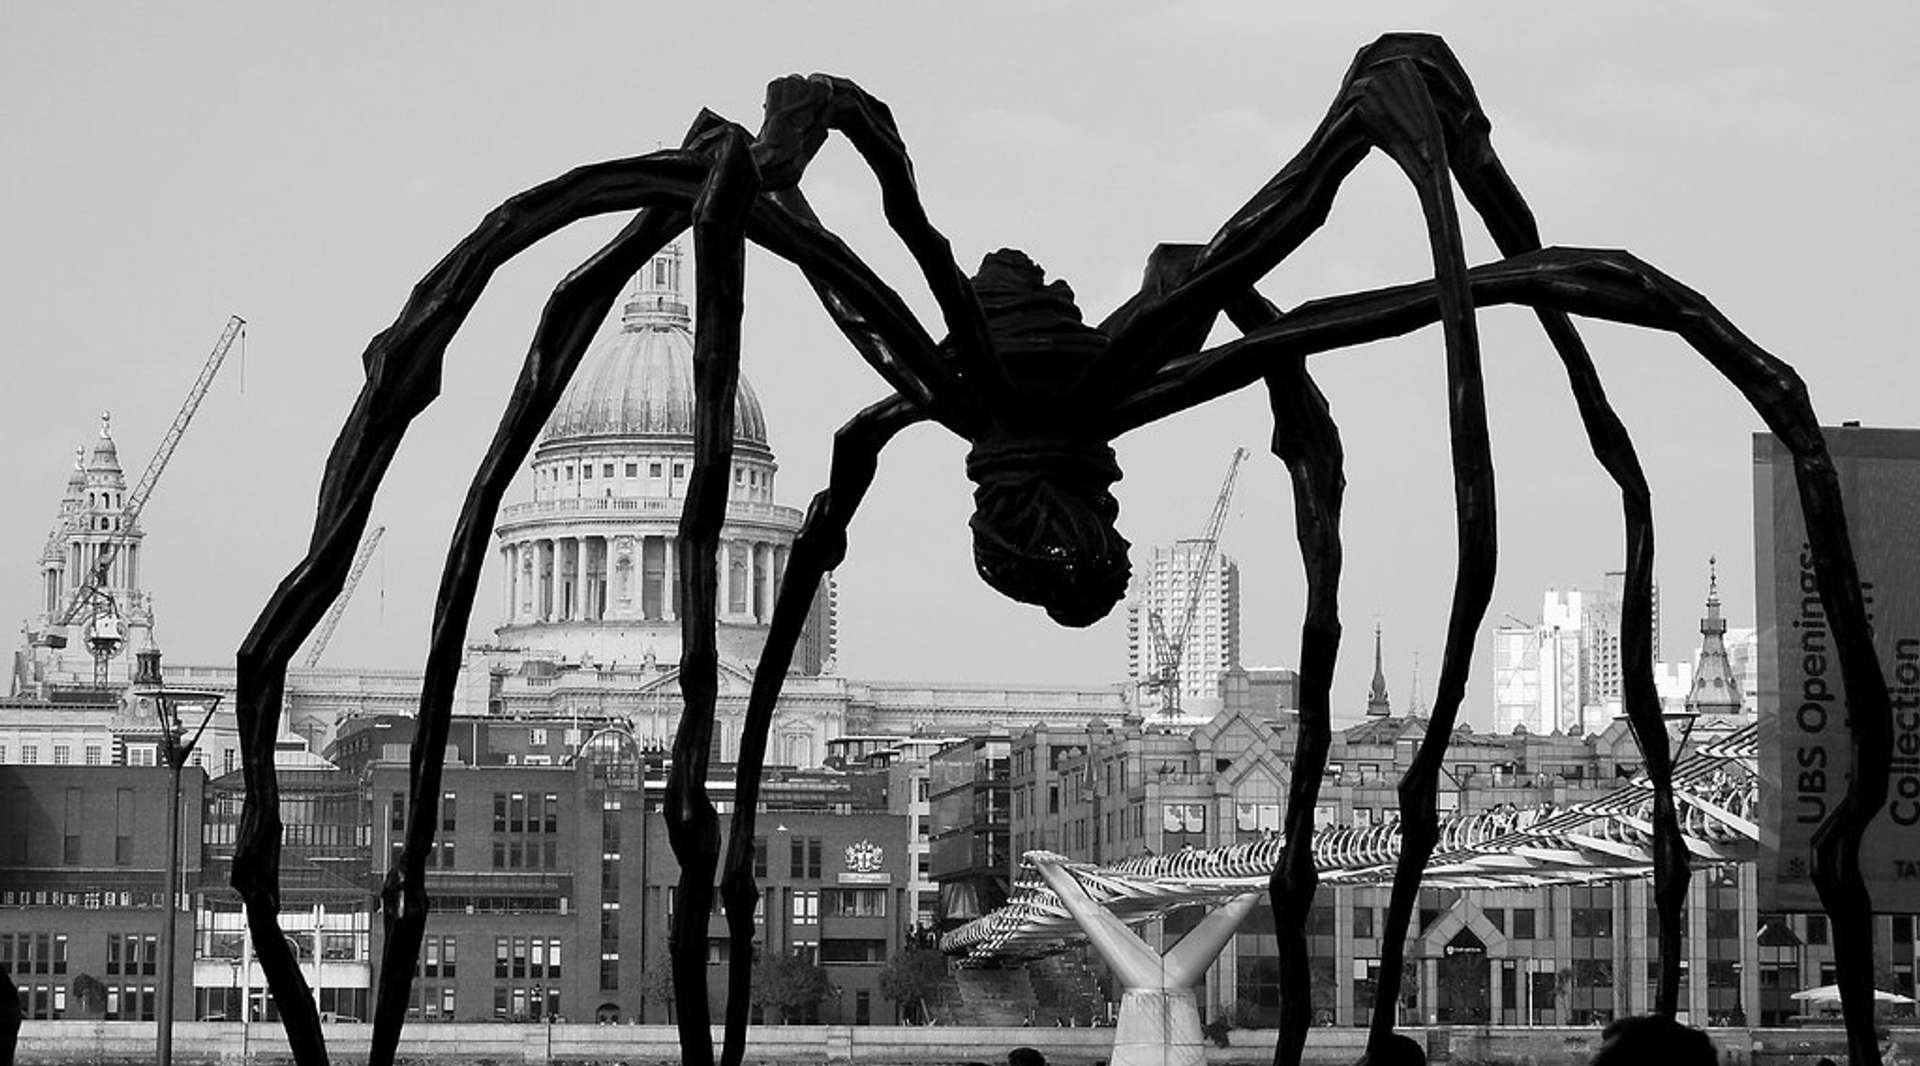 Louise Bourgeois' Maman spider sculpture captured in a black and white photograph, with London's St Pauls Cathedral in the background.